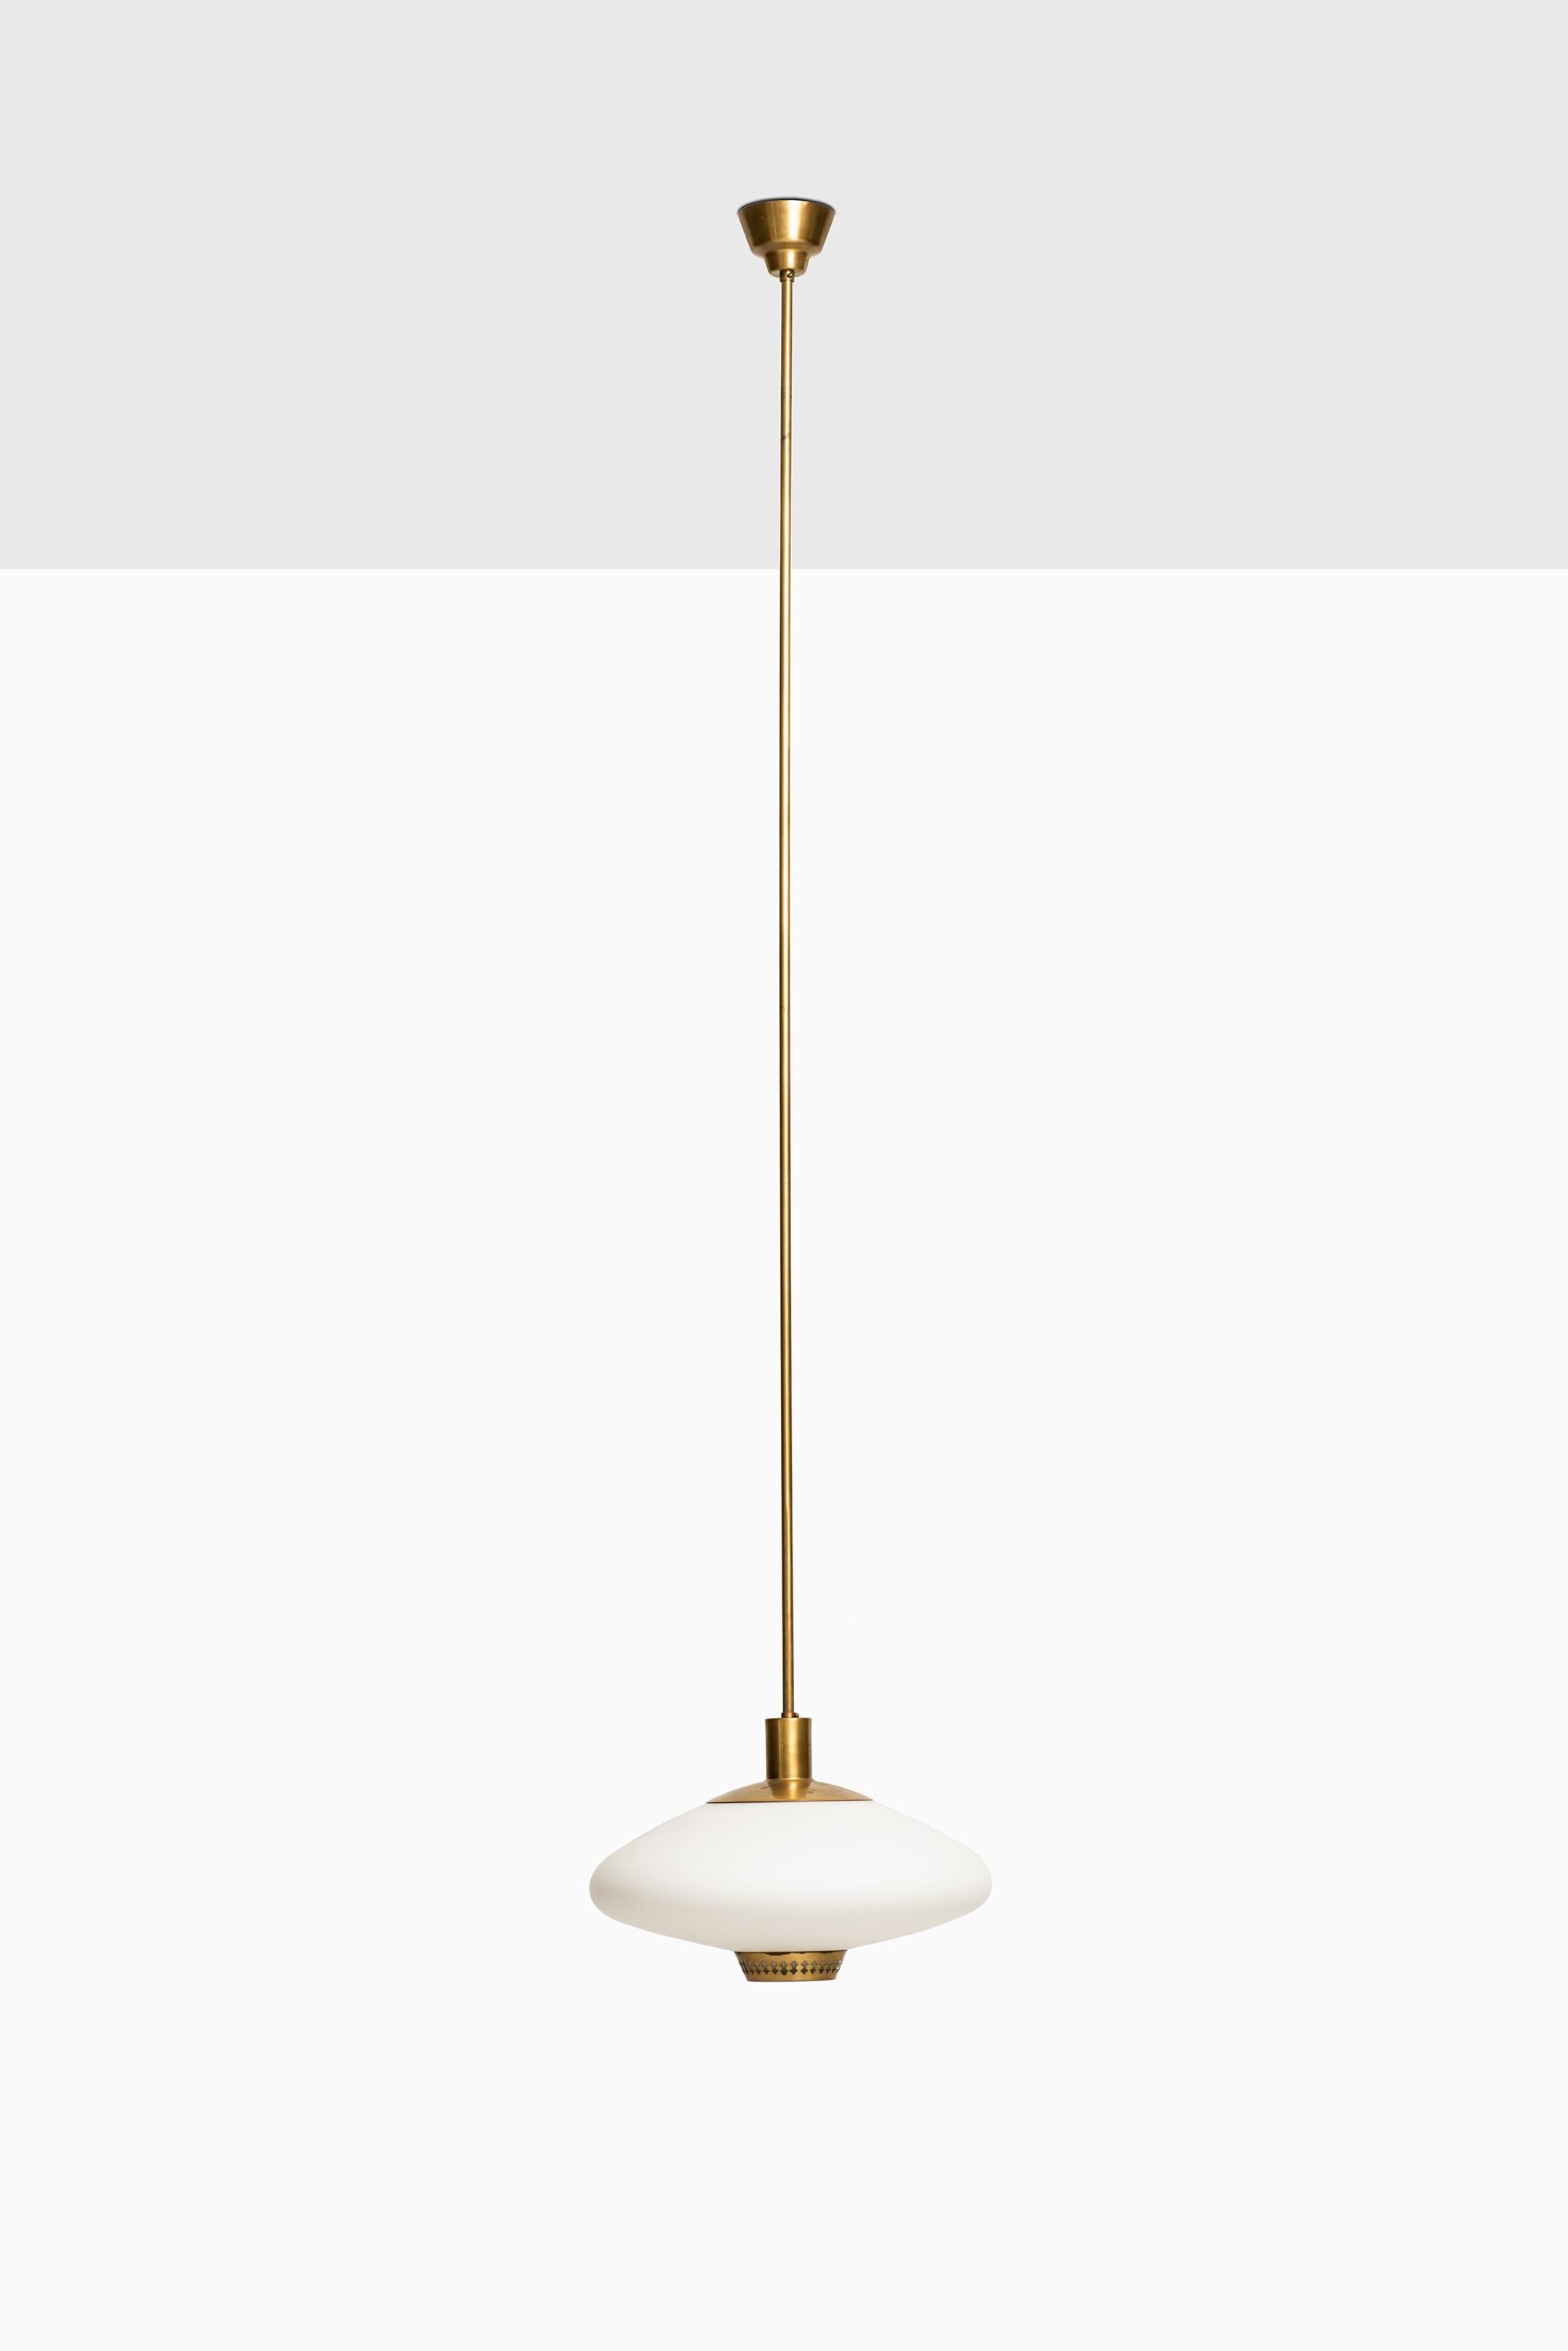 Rare and large ceiling lamp designed by Hans Bergström. Produced by Ateljé Lyktan in Åhus, Sweden.